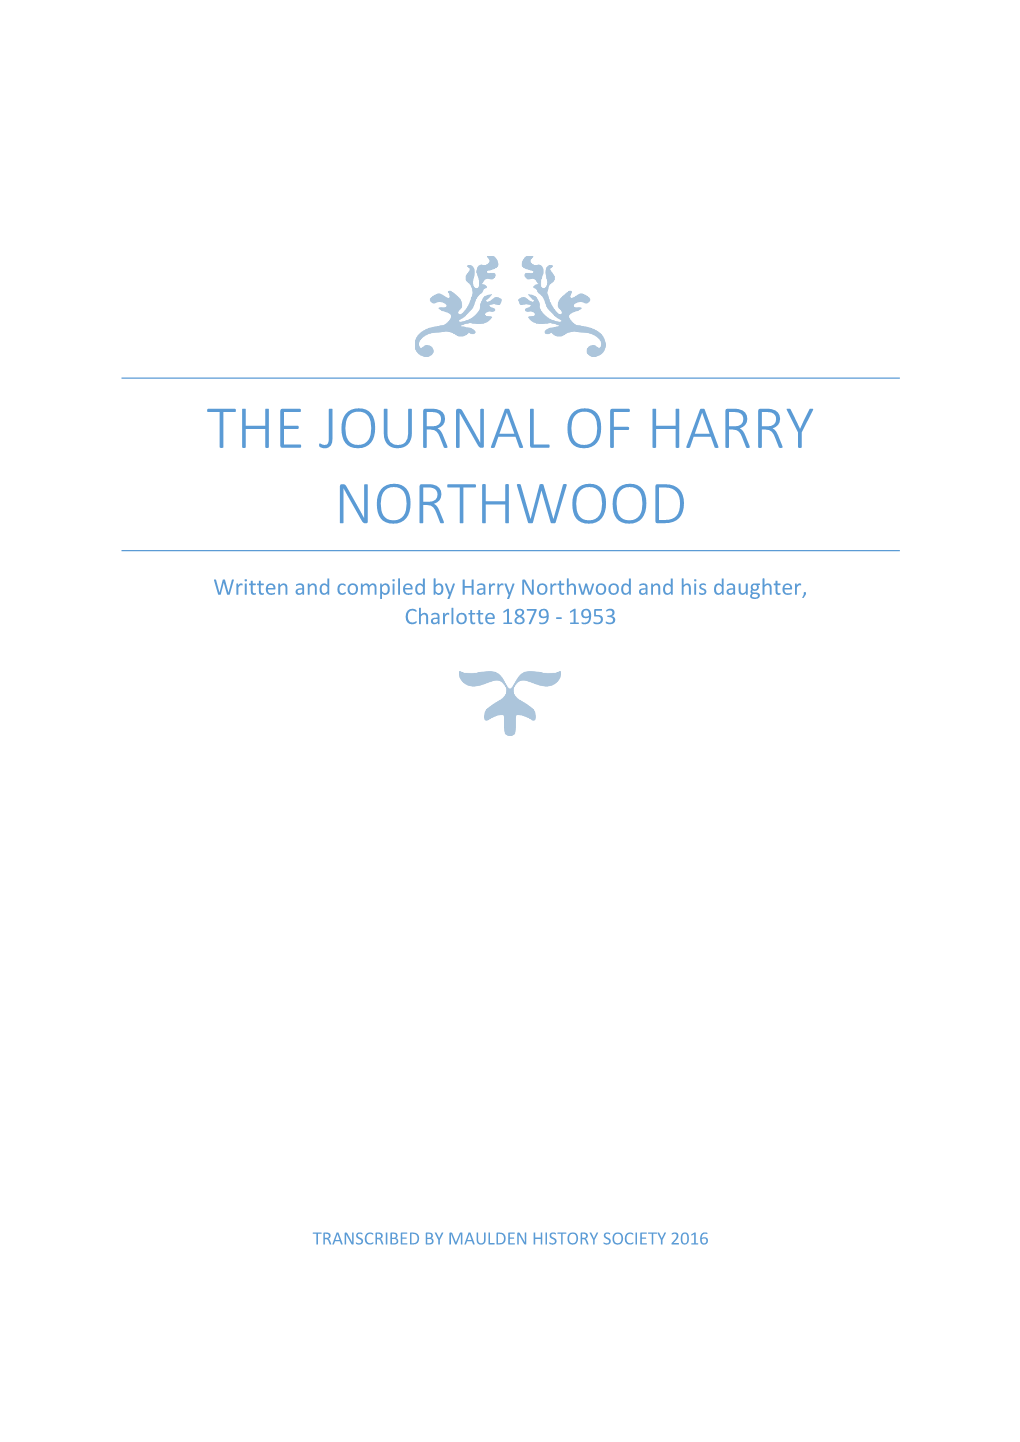 The Journal of Harry Northwood